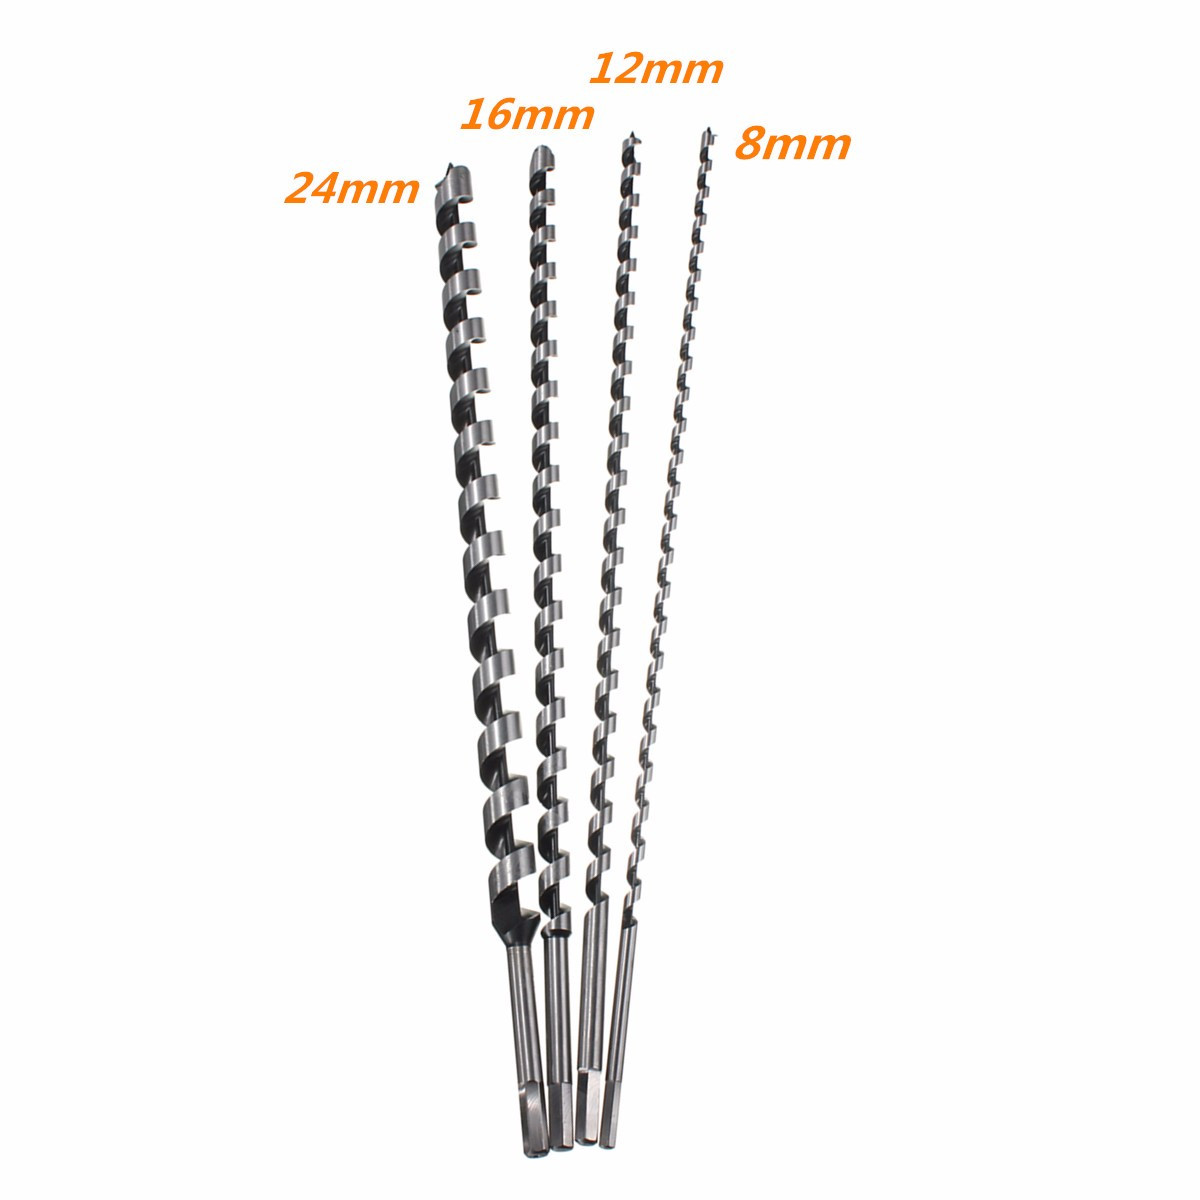 Auger Drill Bits Woodworking Tool